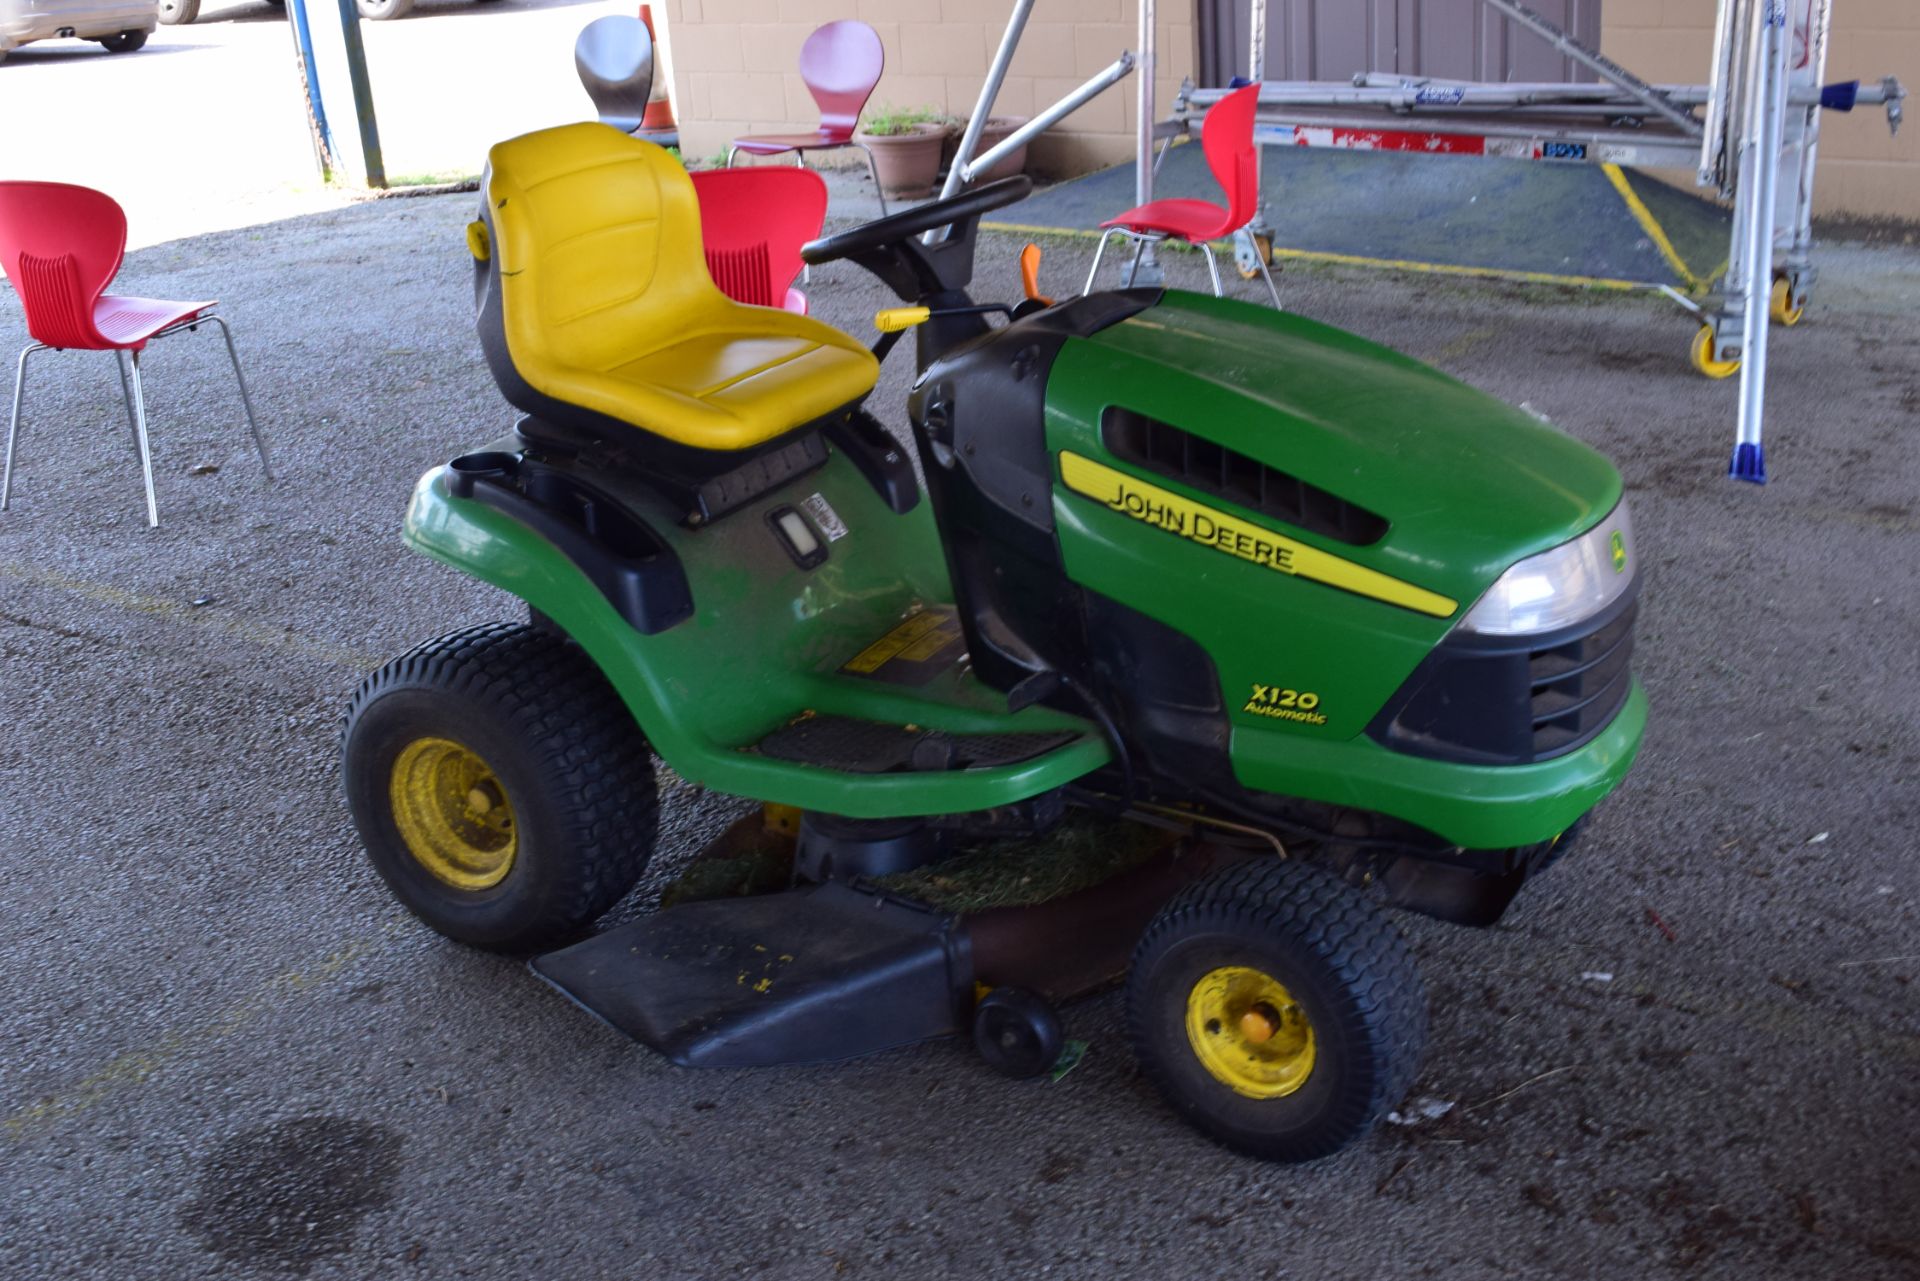 JOHN DEERE X120 AUTOMATIC RIDE-ON LAWN MOWER - Image 3 of 3